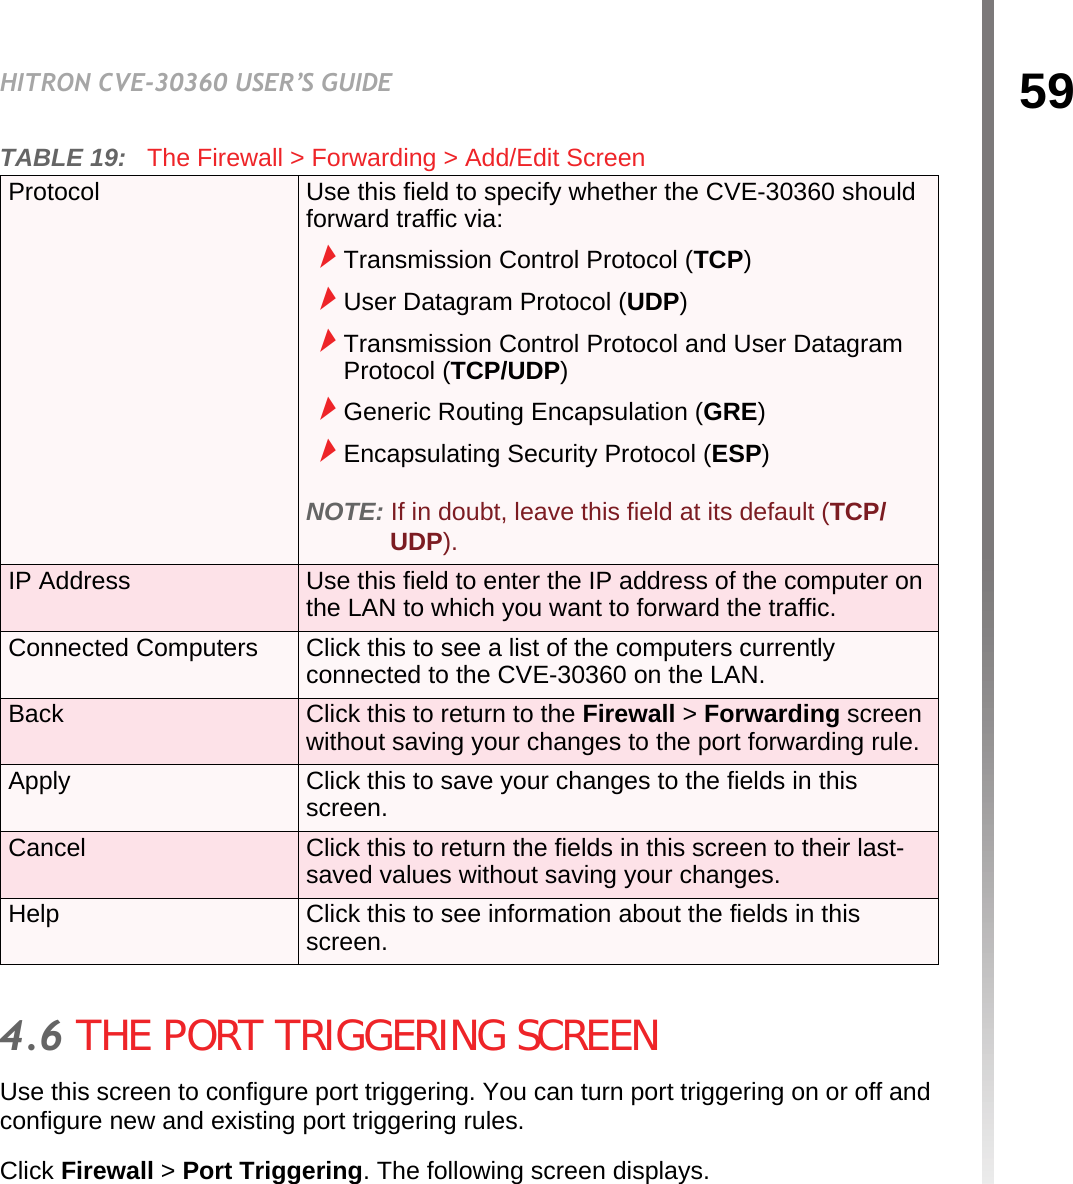 59HITRON CVE-30360 USER’S GUIDEFIREWALL4.6 THE PORT TRIGGERING SCREENUse this screen to configure port triggering. You can turn port triggering on or off and configure new and existing port triggering rules.Click Firewall &gt; Port Triggering. The following screen displays.Protocol Use this field to specify whether the CVE-30360 should forward traffic via:Transmission Control Protocol (TCP)User Datagram Protocol (UDP)Transmission Control Protocol and User Datagram Protocol (TCP/UDP)Generic Routing Encapsulation (GRE)Encapsulating Security Protocol (ESP)NOTE: If in doubt, leave this field at its default (TCP/UDP).IP Address  Use this field to enter the IP address of the computer on the LAN to which you want to forward the traffic.Connected Computers Click this to see a list of the computers currently connected to the CVE-30360 on the LAN.Back Click this to return to the Firewall &gt; Forwarding screen without saving your changes to the port forwarding rule.Apply Click this to save your changes to the fields in this screen.Cancel Click this to return the fields in this screen to their last-saved values without saving your changes.Help Click this to see information about the fields in this screen.TABLE 19:   The Firewall &gt; Forwarding &gt; Add/Edit Screen